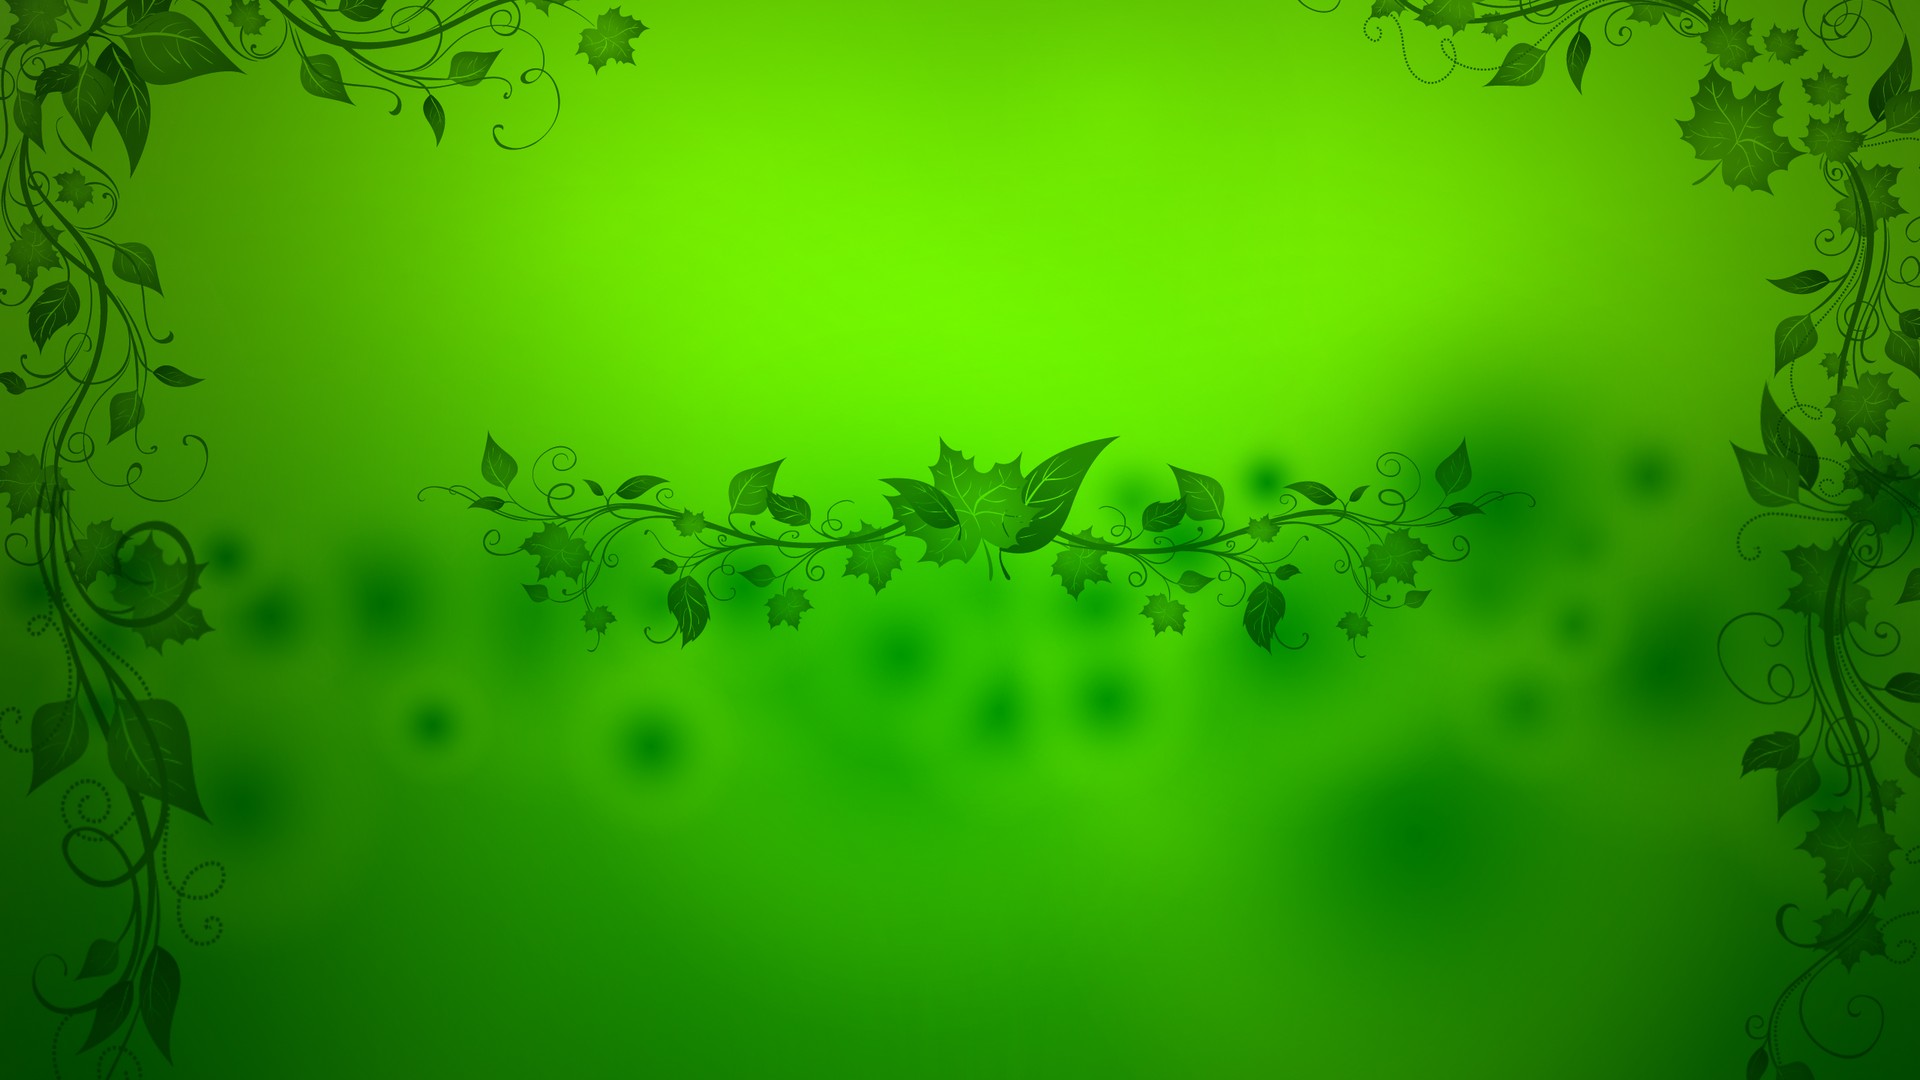 Best Green Wallpaper with image resolution 1920x1080 pixel. You can use this wallpaper as background for your desktop Computer Screensavers, Android or iPhone smartphones